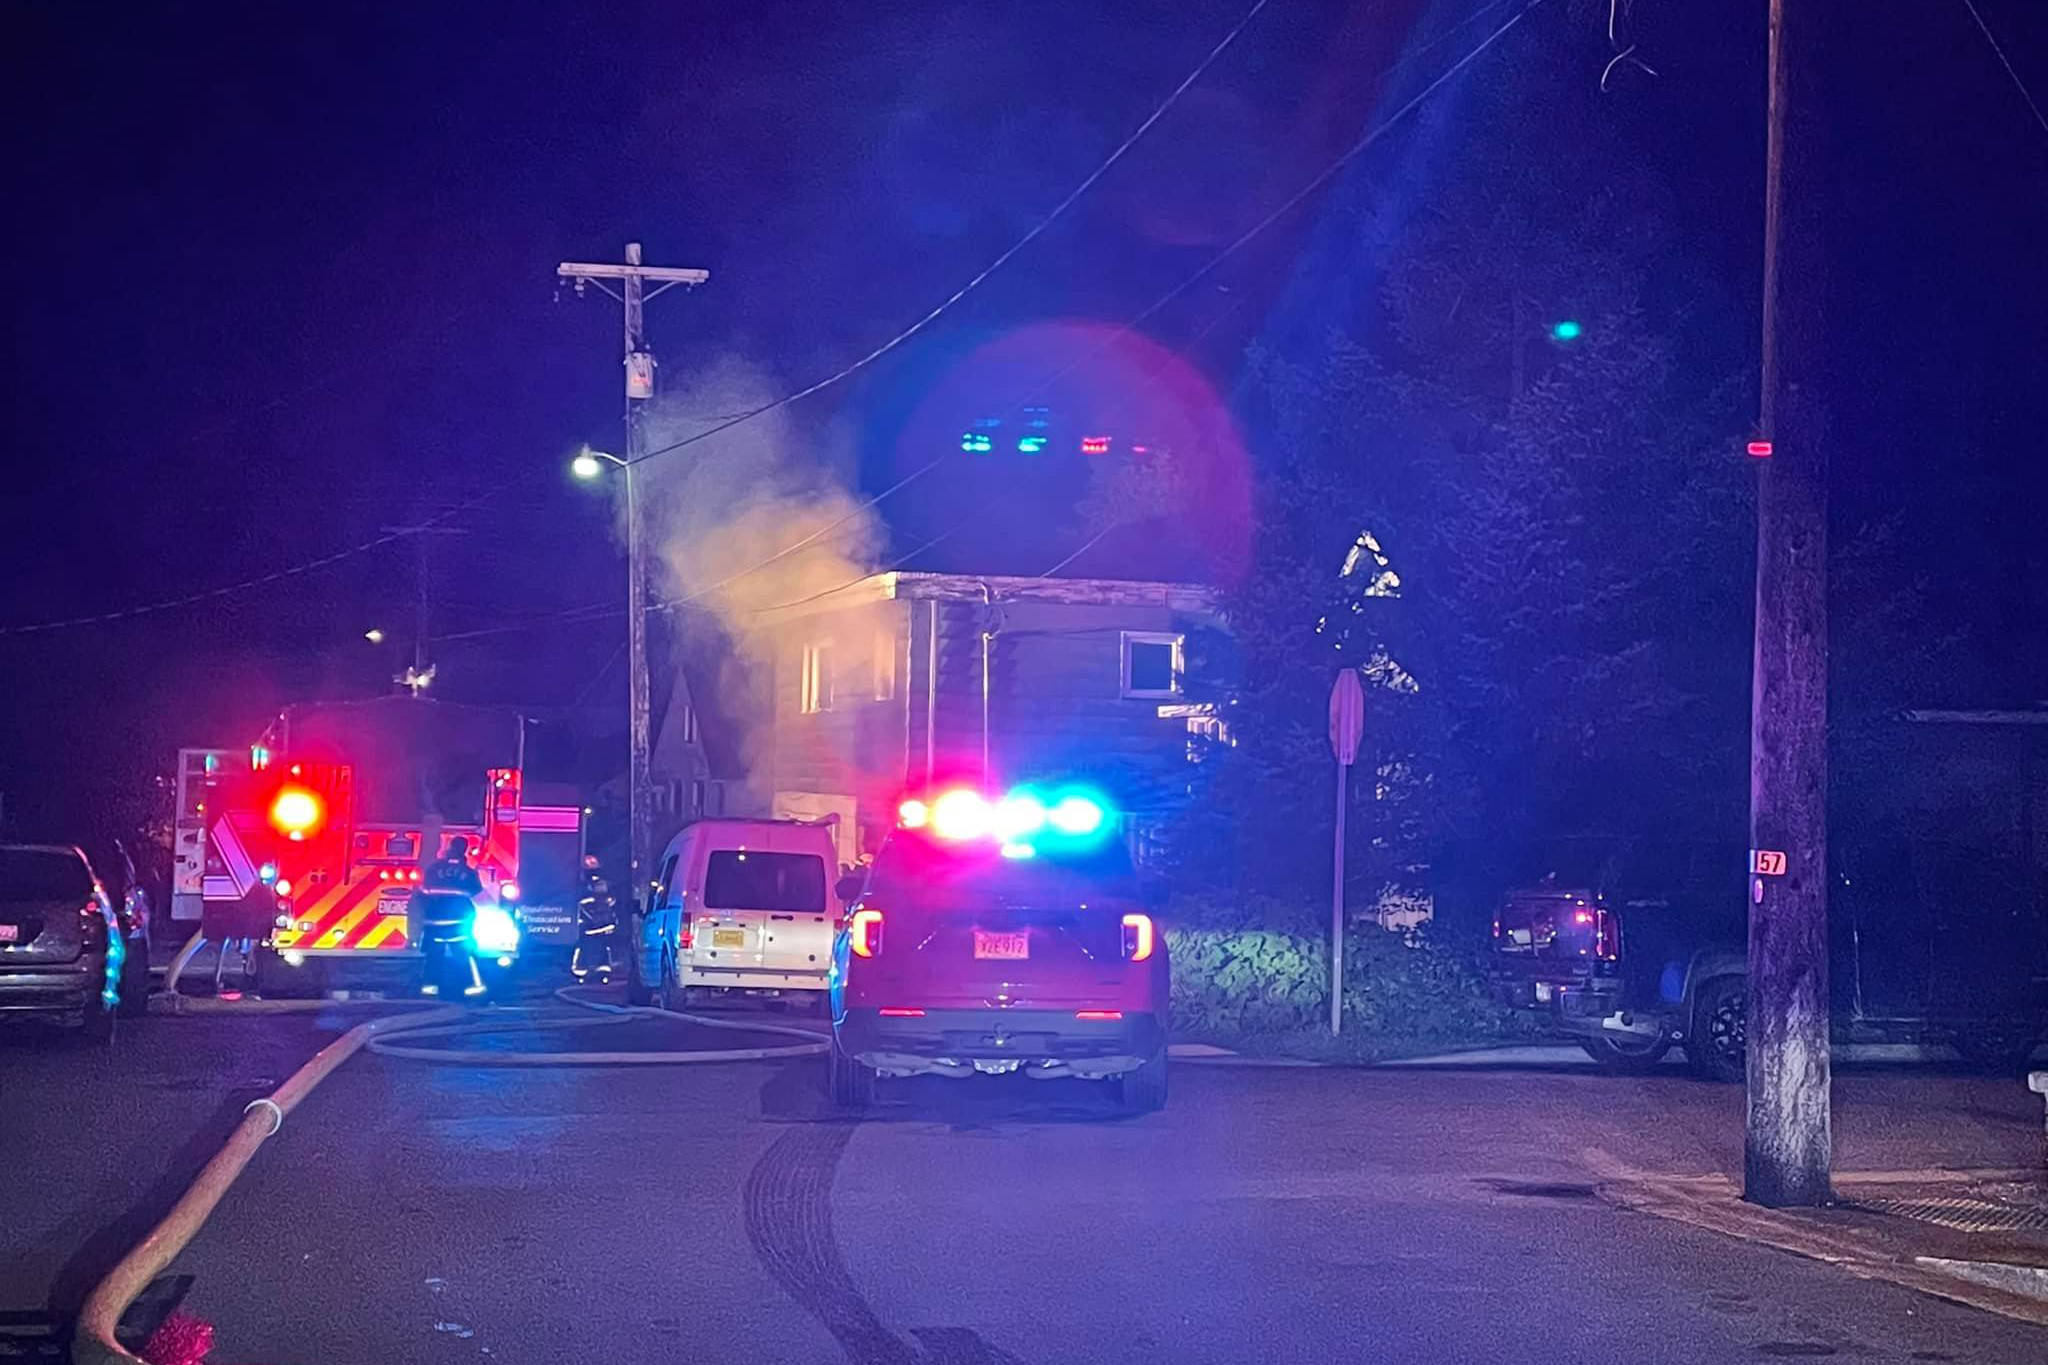 Capital City Fire/Rescue responded to multiple fires Thursday morning, including this one on West 10th Street, reported at 3:16 a.m. (Courtesy photo / CCFR)